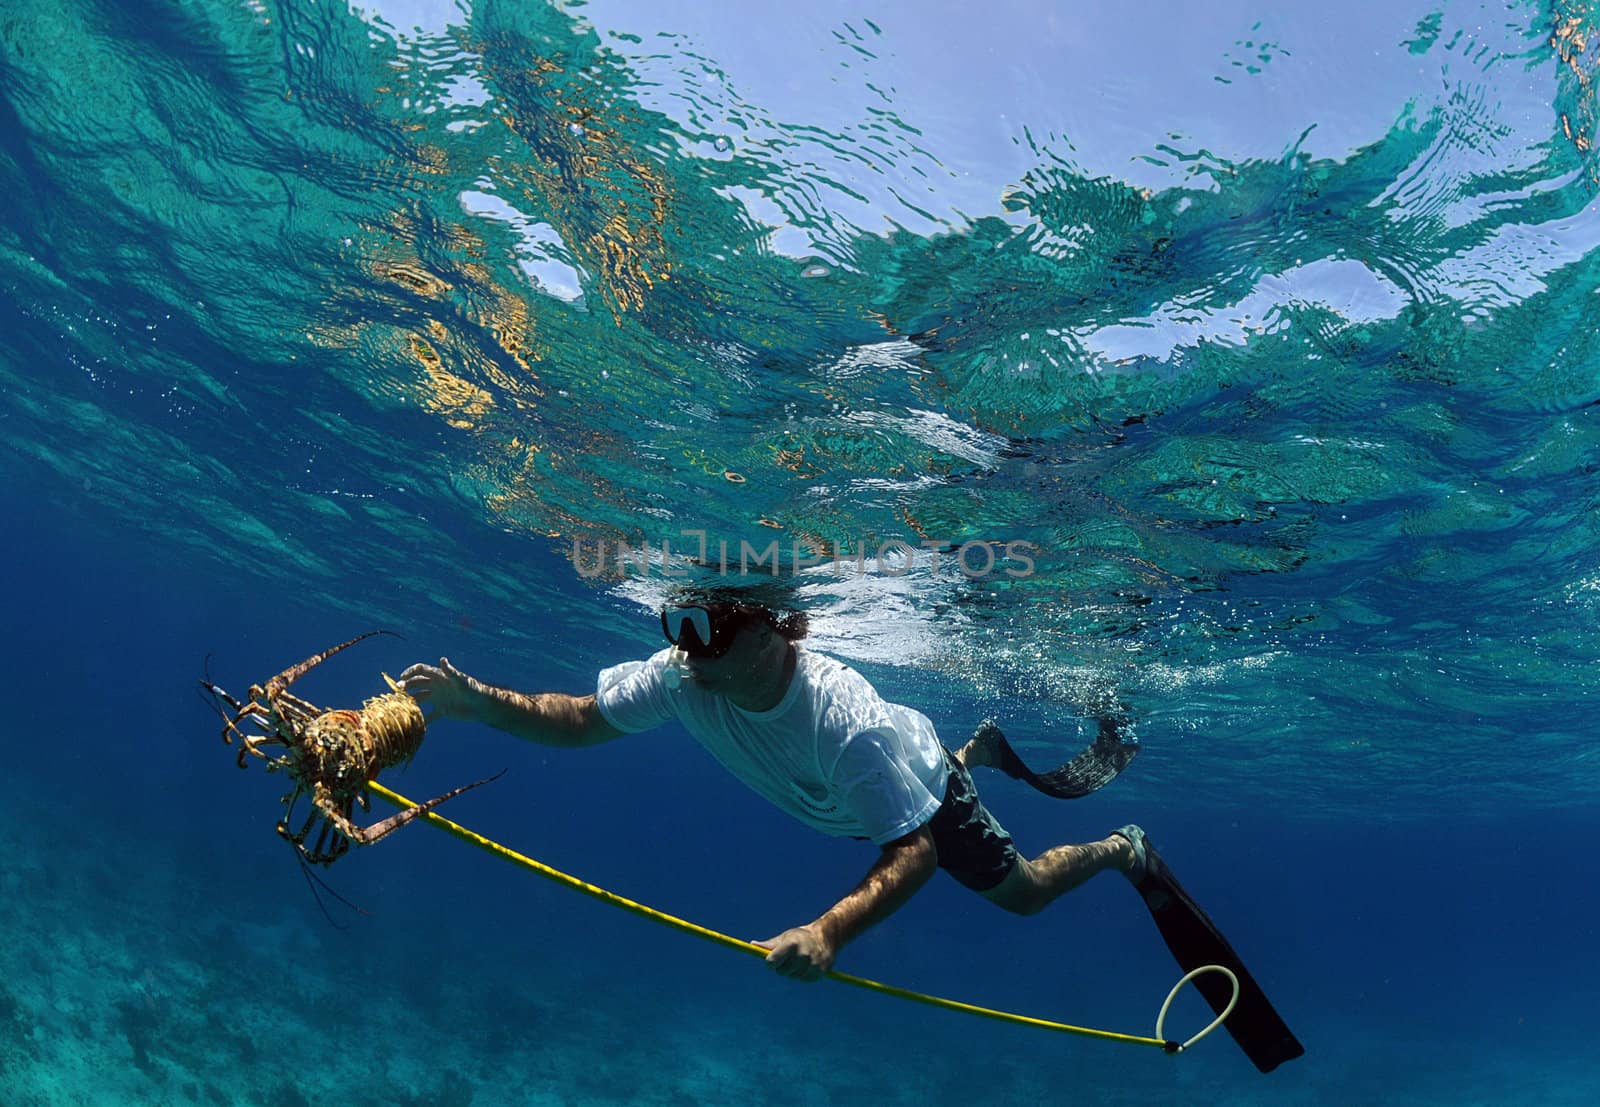 Underwater image of man catching lobster with a speargun while free diving in ocean